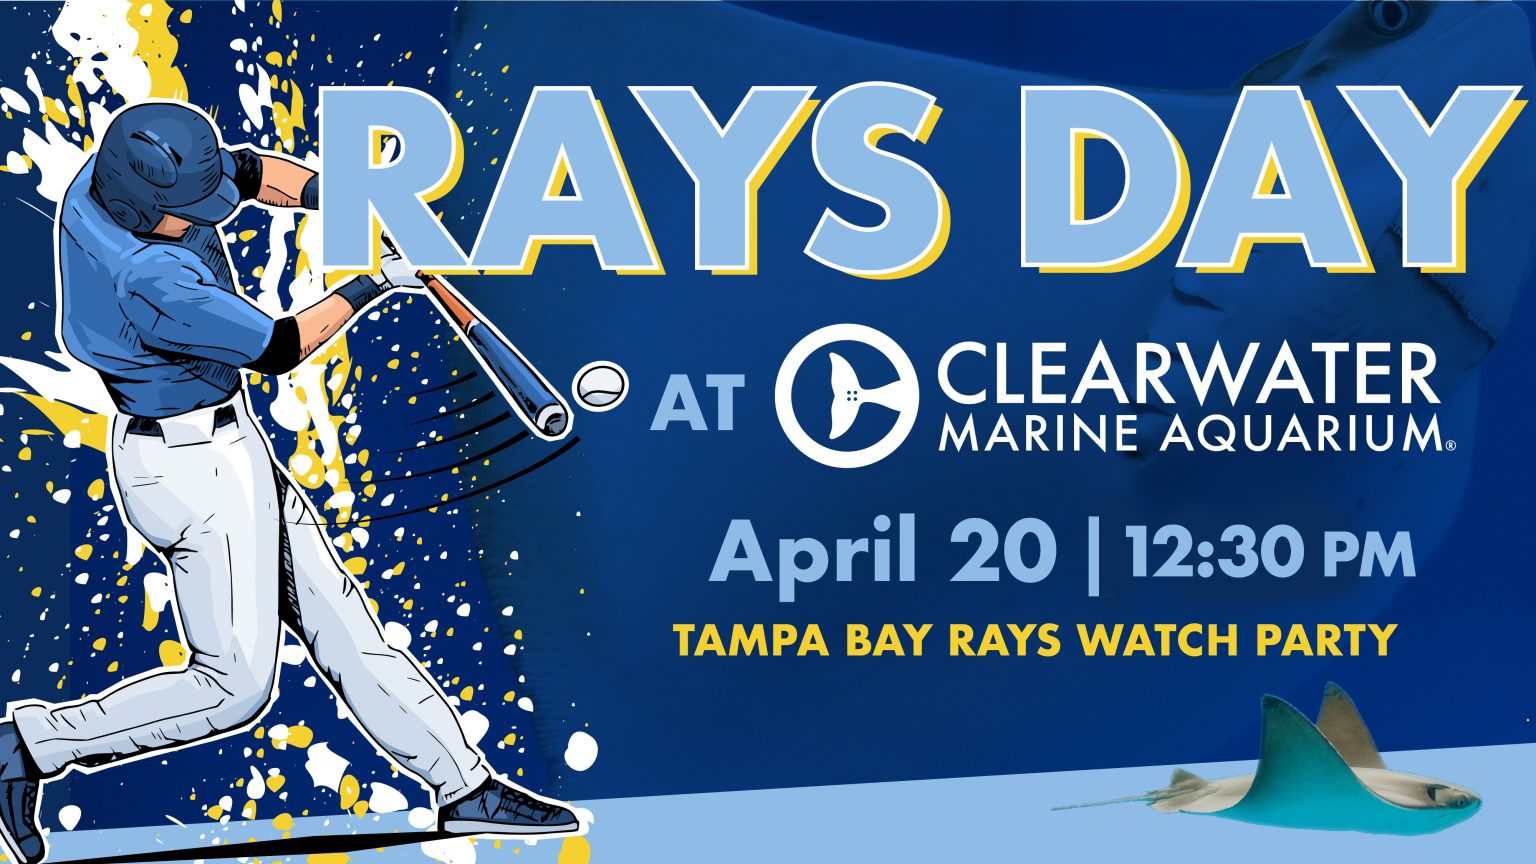 This graphic is for the Rays Day at Clearwater Marine Aquarium.